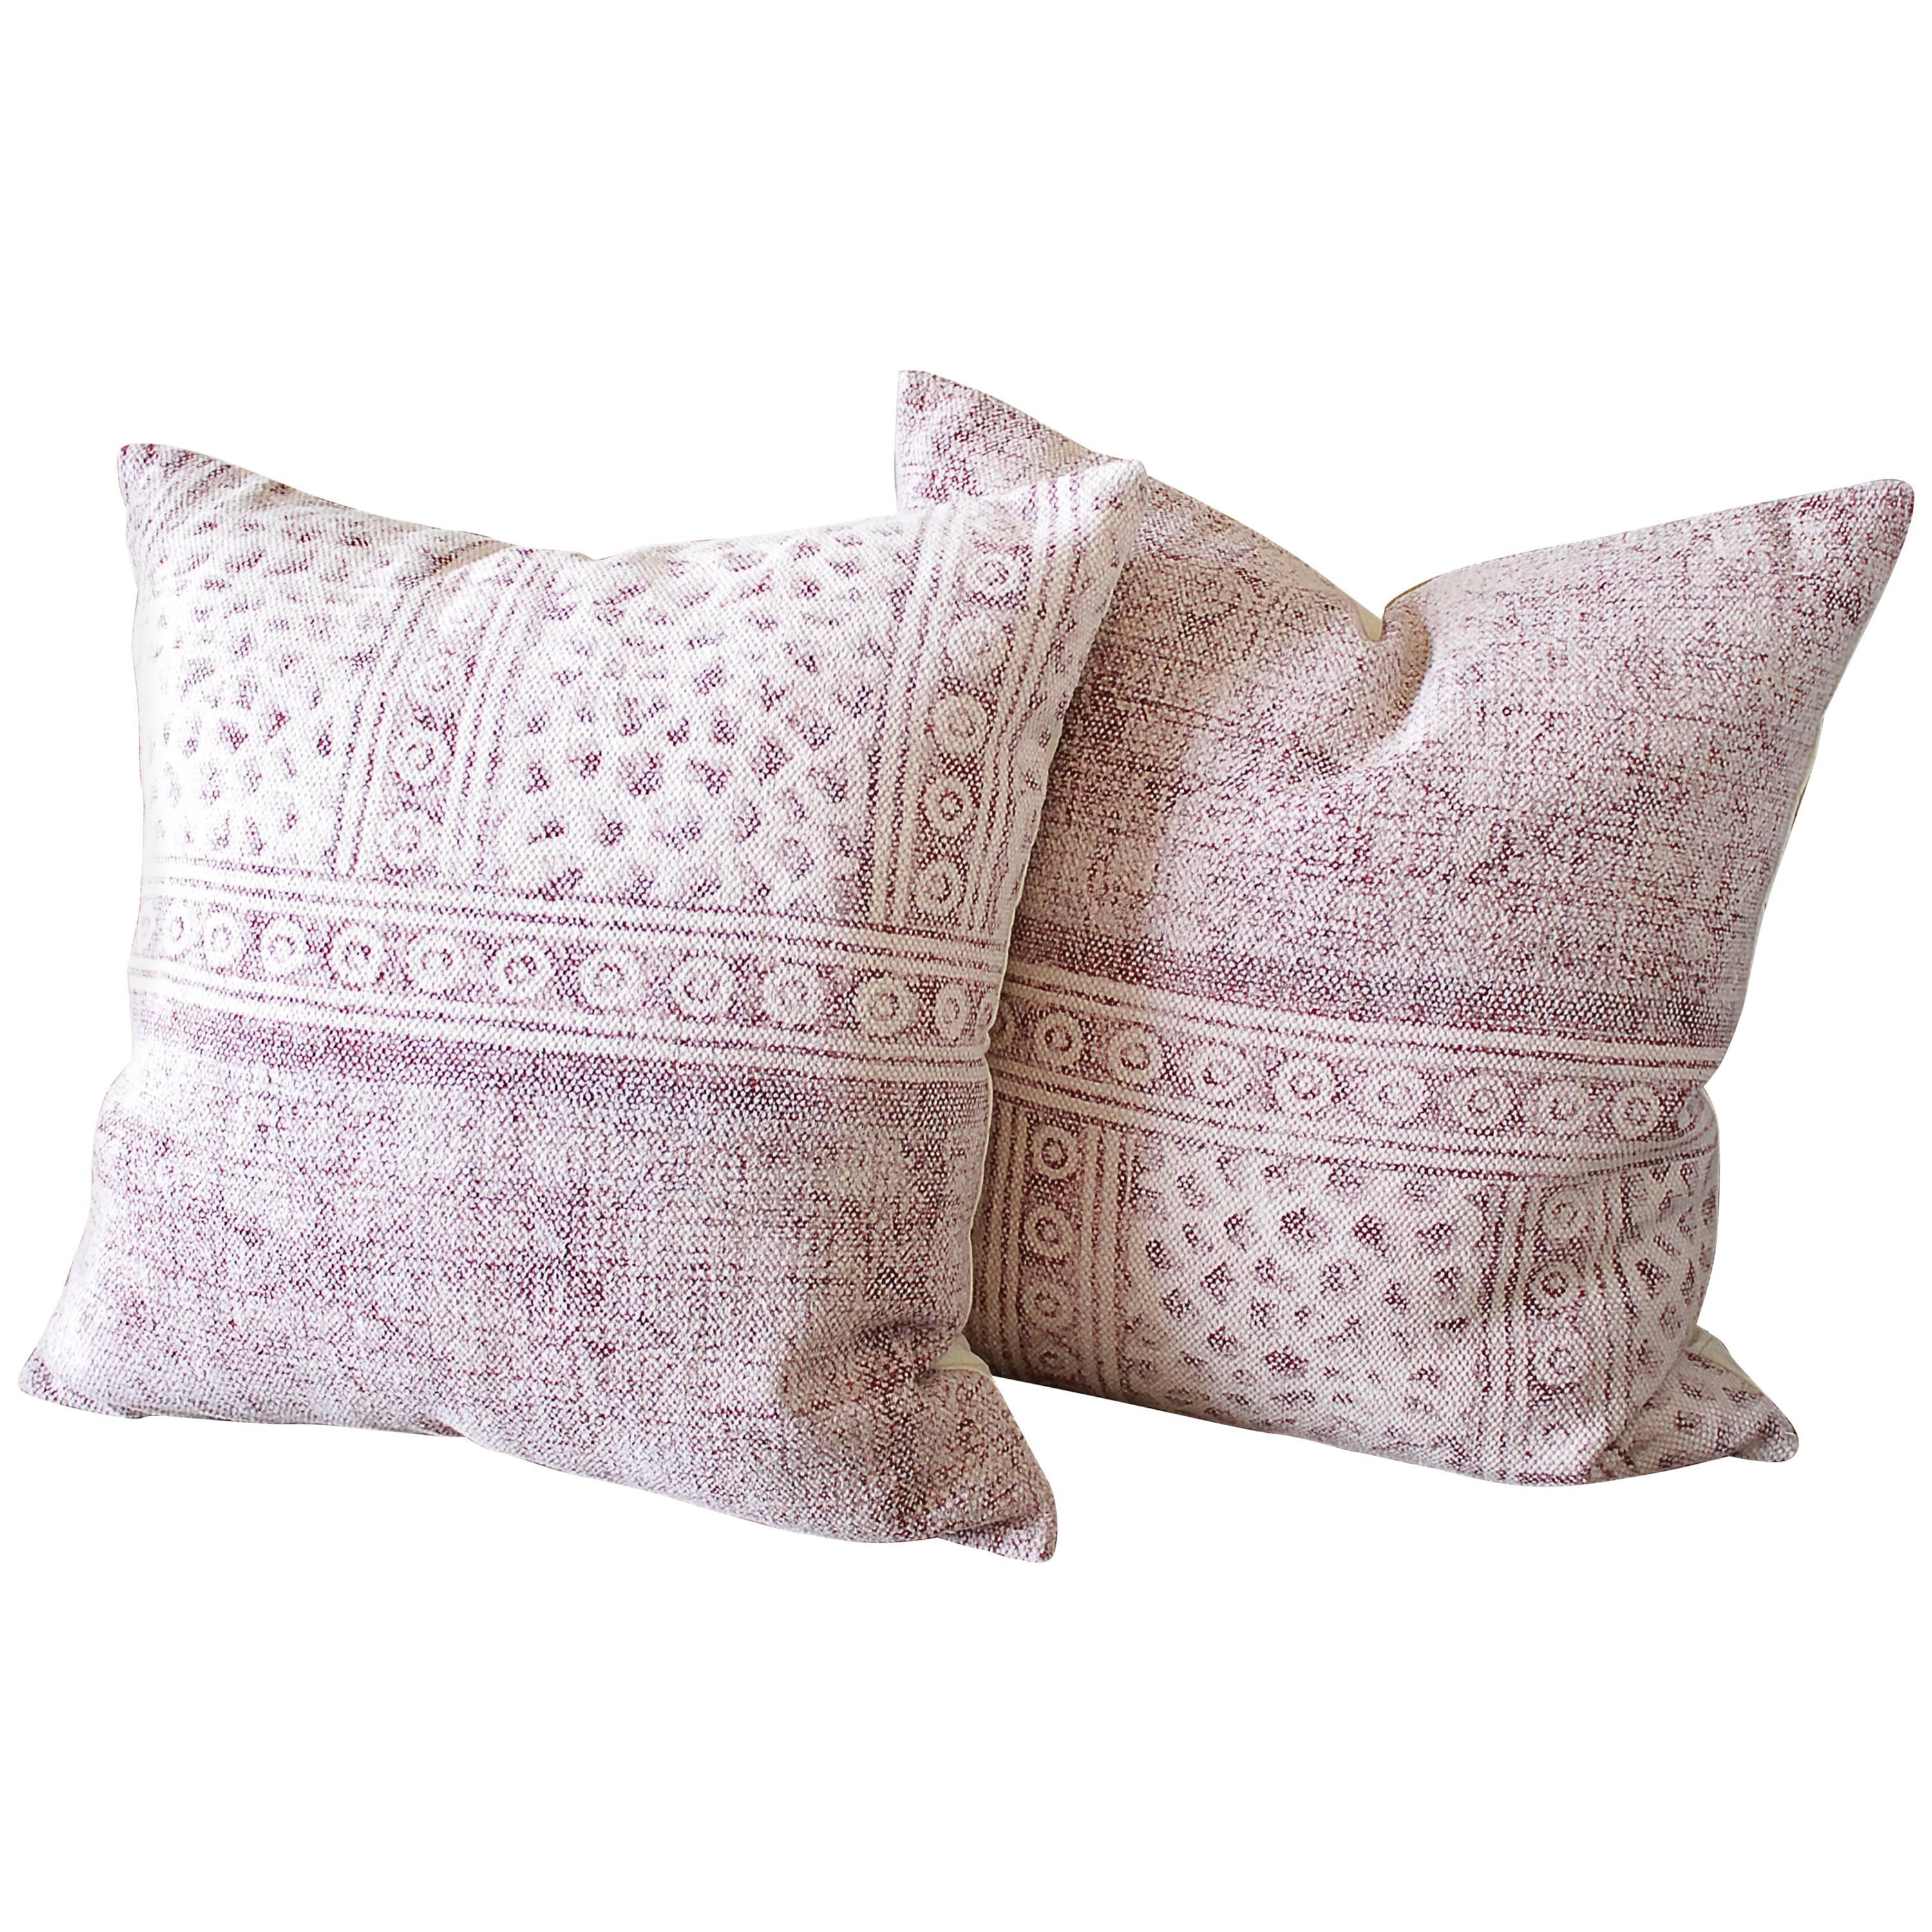 Boho Chic Color Block Over Dyed Pillow